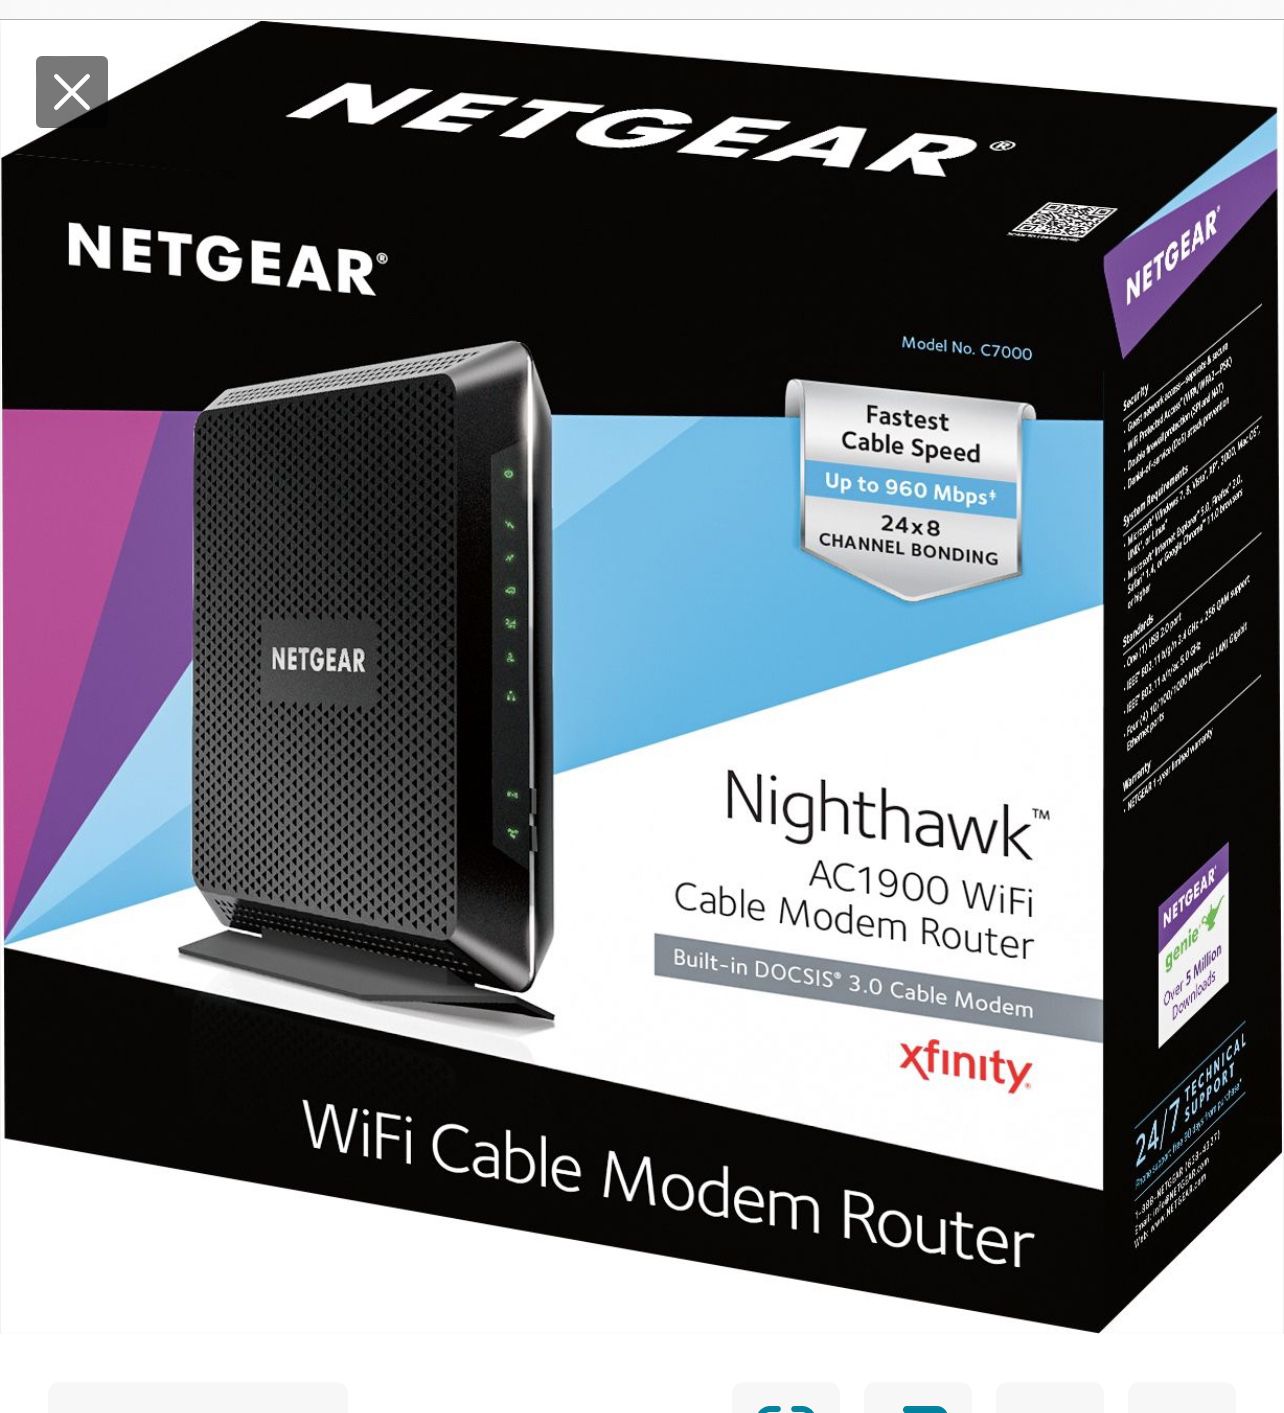 Netgear Nighthawk C7000v2-AC1900 WiFi Cable Modem Router  The Nighthawk Dual-Band AC1900 Router with 24 x 8 DOCSIS 3.0 Cable Modem delivers WiFi spee